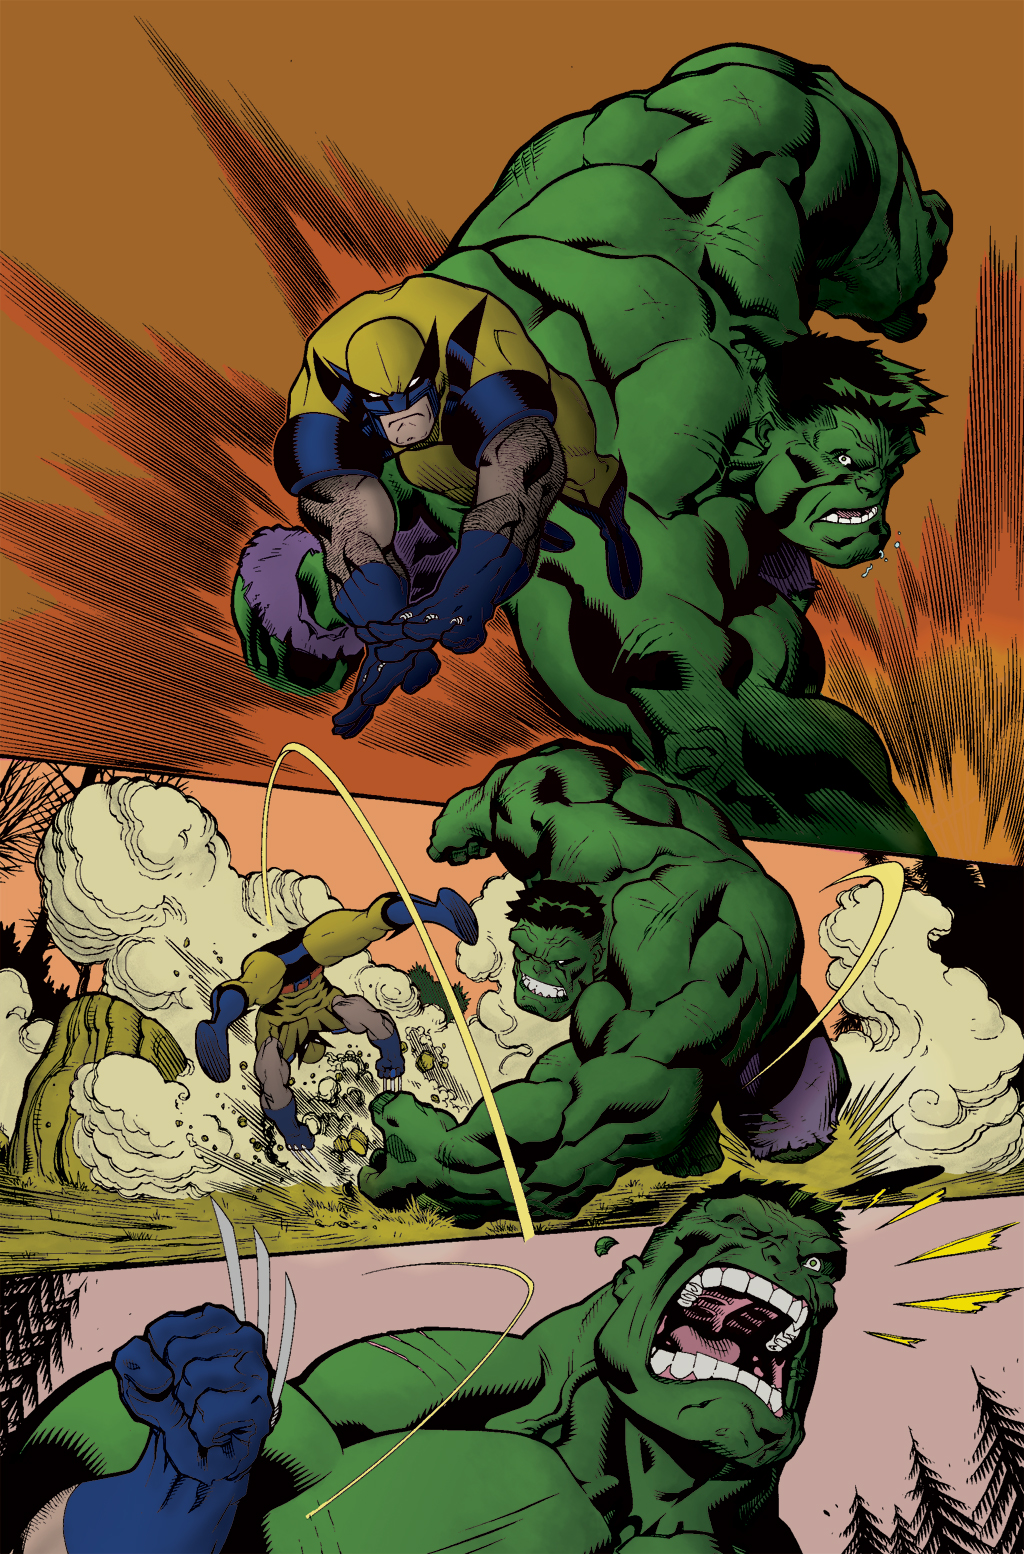 a hulk punching the face of another wrestler